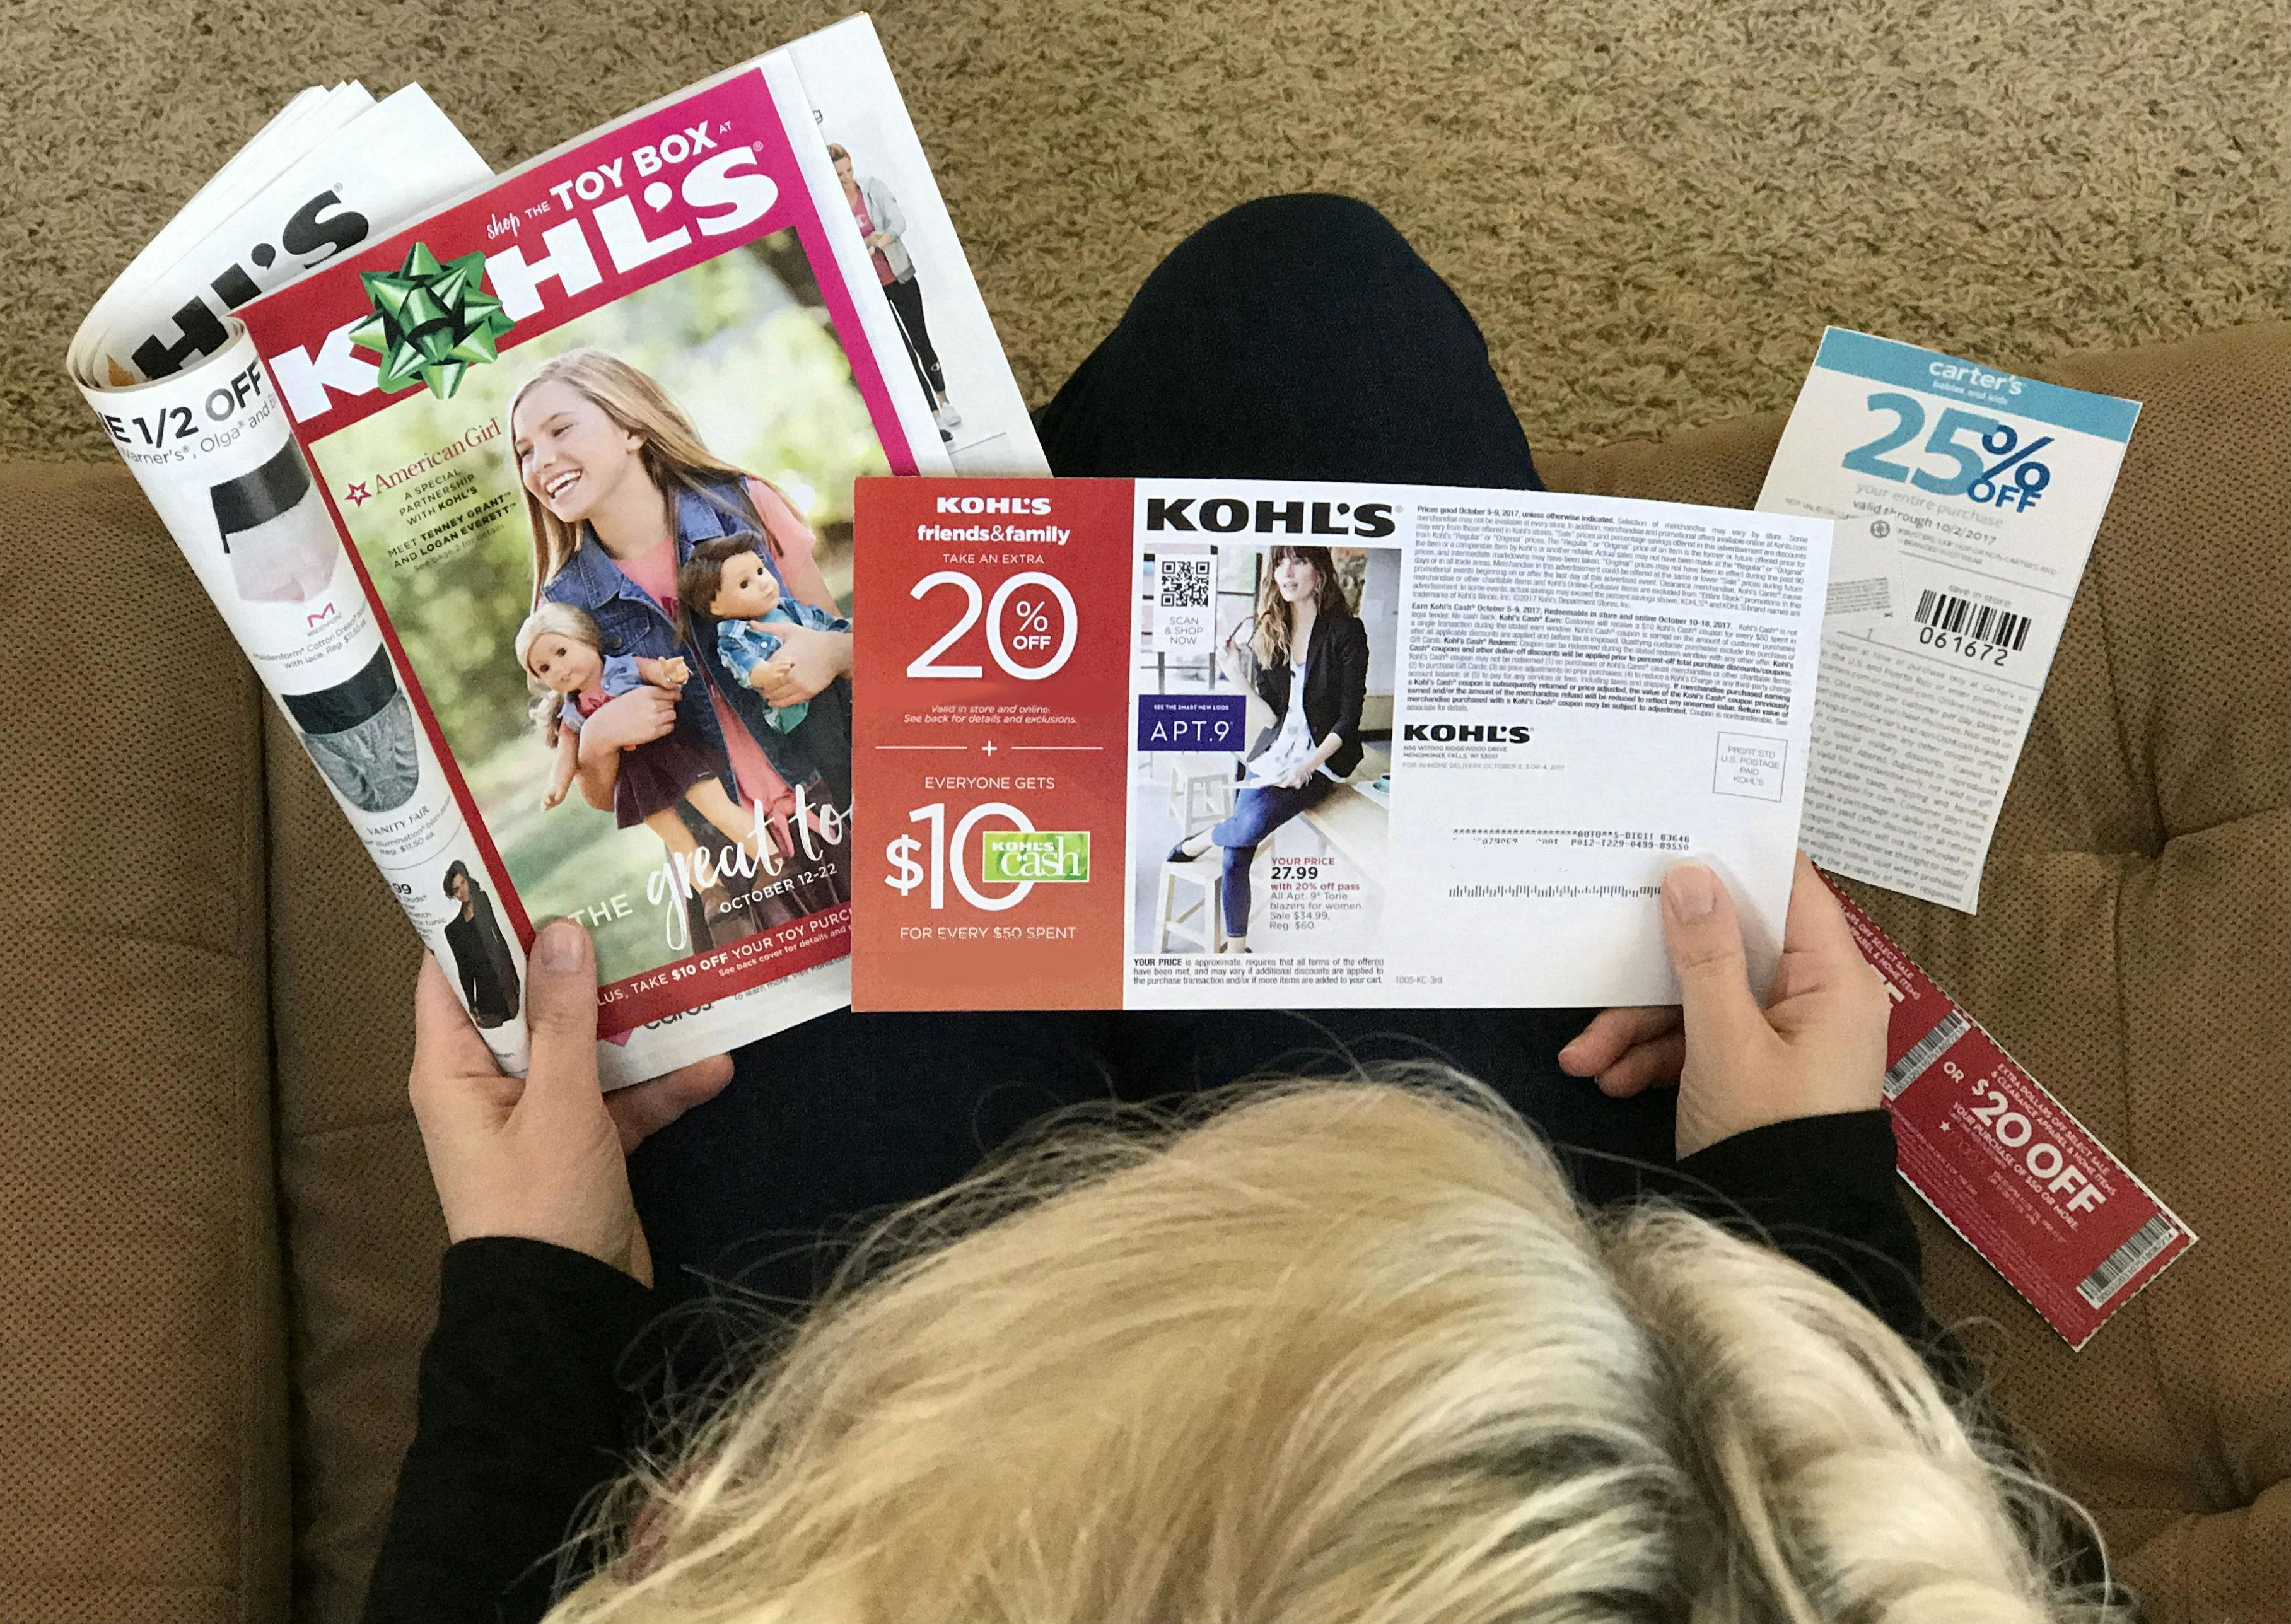 A person sitting on a couch, looking at some Kohl's coupons and an ad.